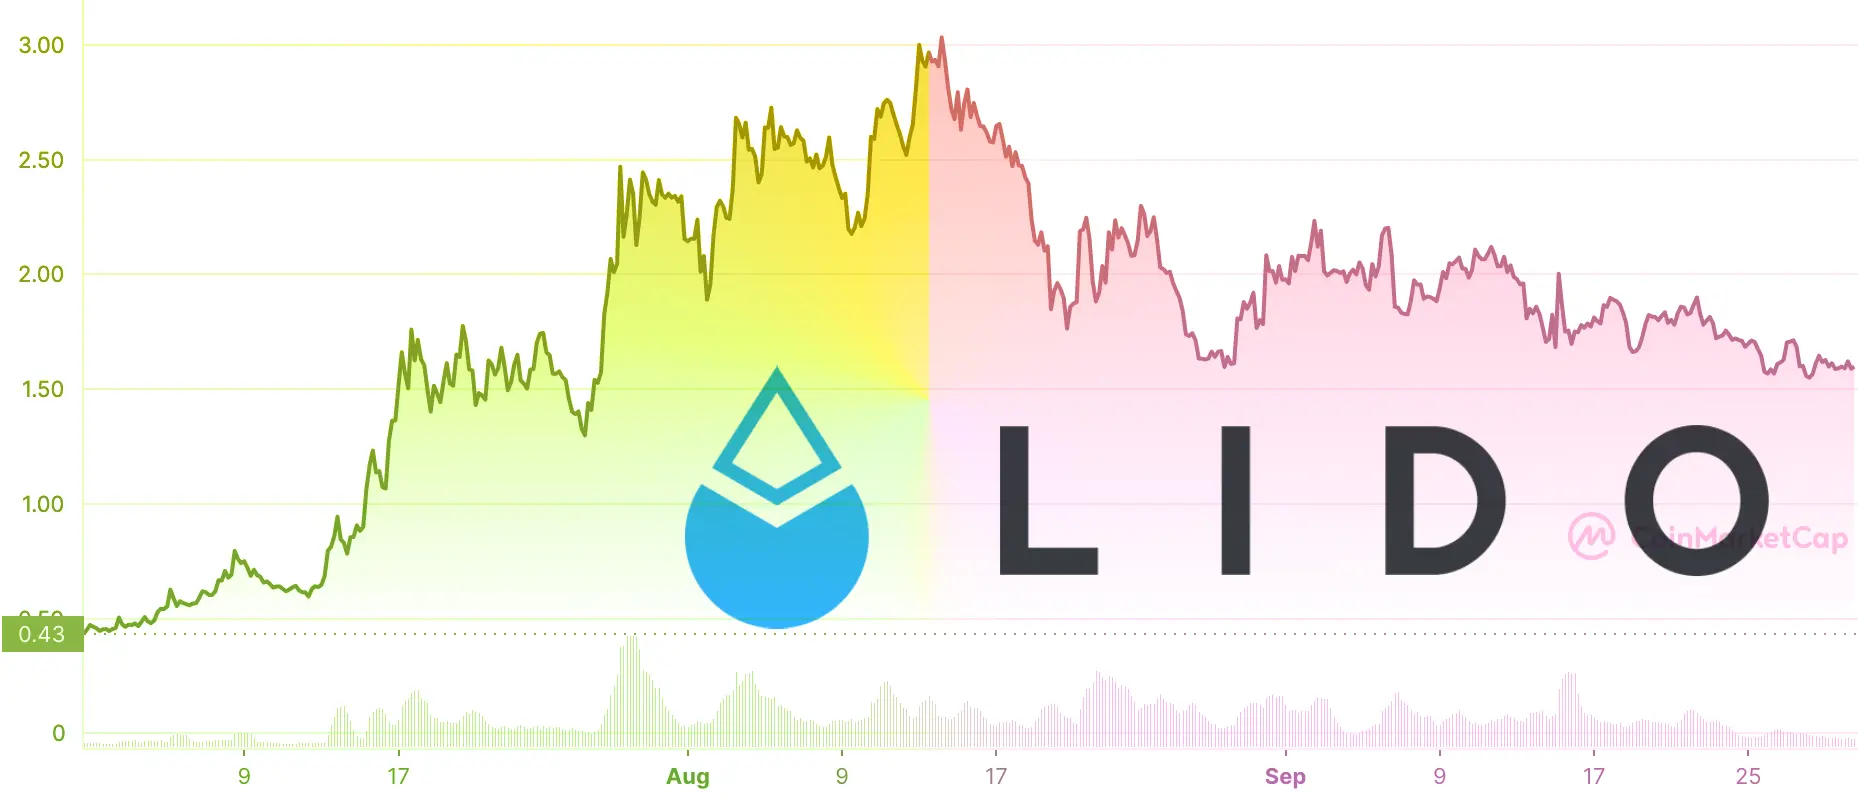 Price chart of the LDO price from July 1 through September 30